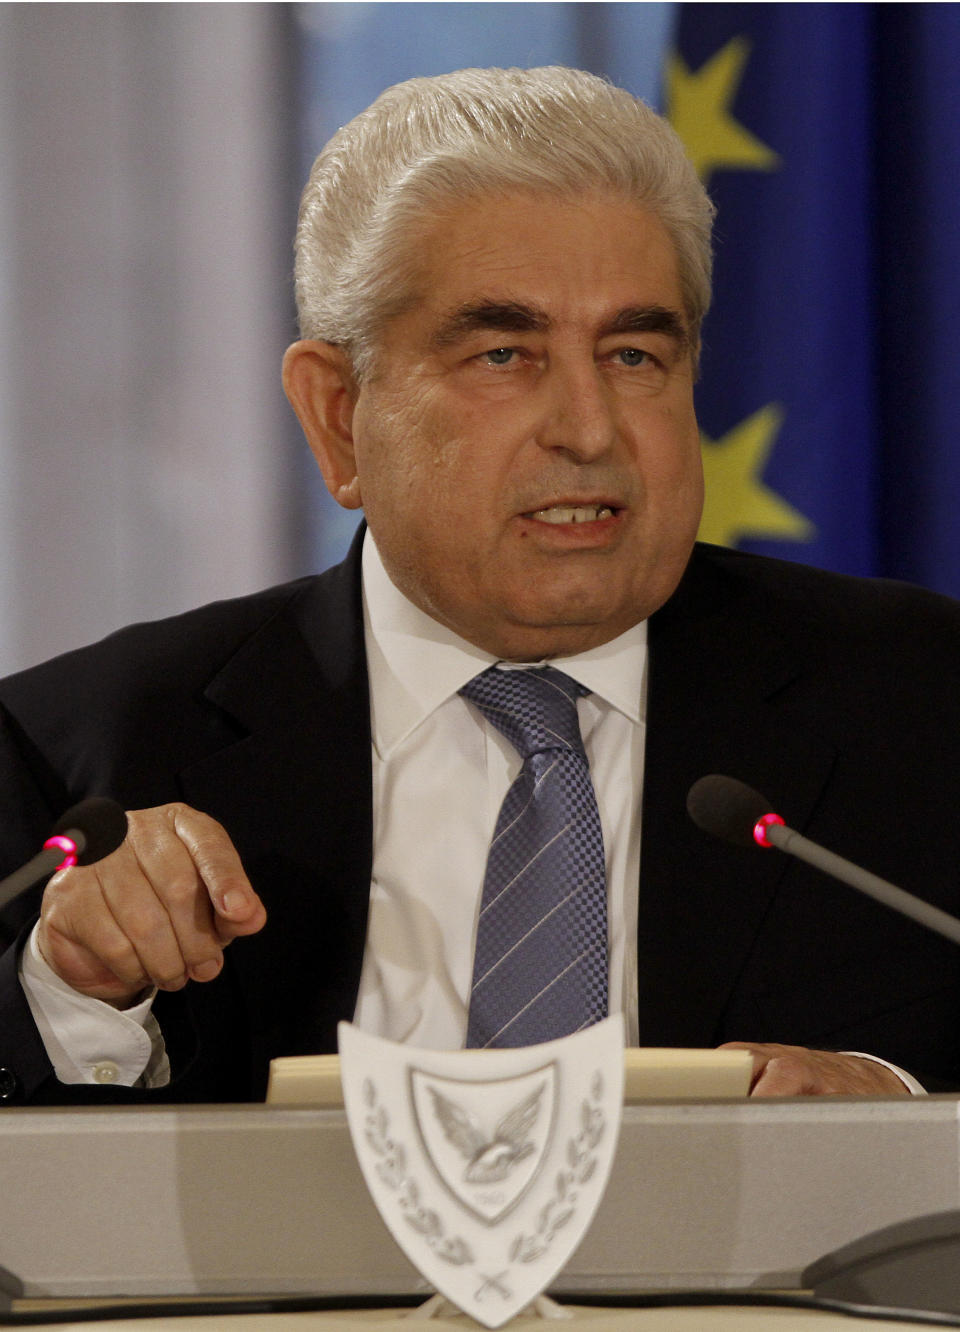 Cypriot President Dimitris Christofias makes his statement to the media at the presidential palace in Nicosia, Cyprus, Friday, June 1, 2012. The president says he has tasked officials to draw up plans on how the country would deal with Greece's possible exit from the eurozone. Christofias told a news conference that conditions would be "chaotic" if debt-drowned Greece quits the euro and that the impact of such a move would be felt not only by all other countries using the currency, but all of Europe. (AP Photo/Petros Karadjias)